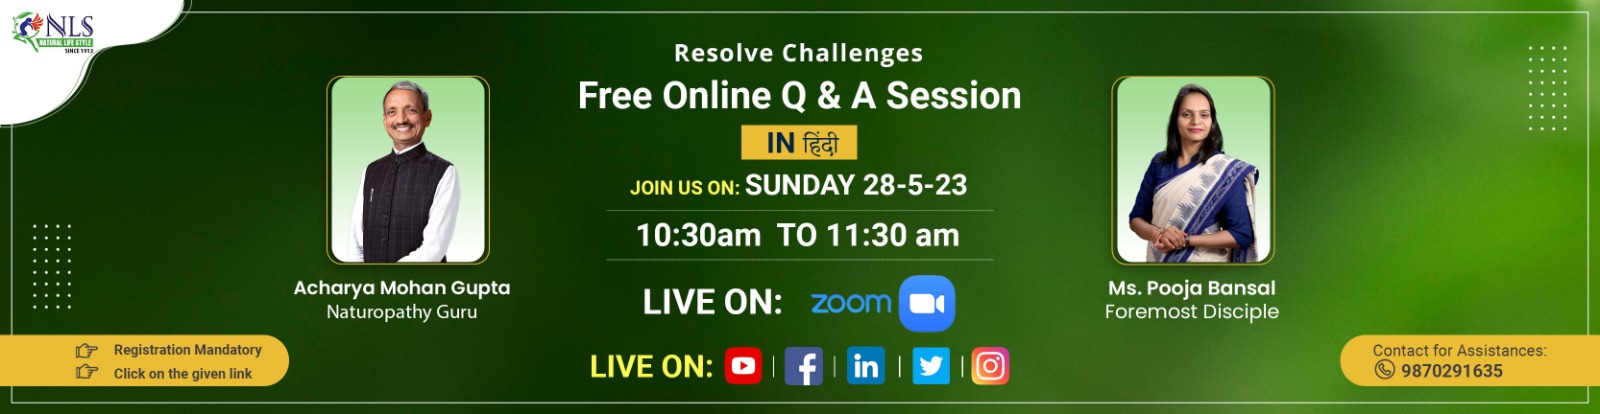 Resolve Challenges ( Free Online Q/A Session )